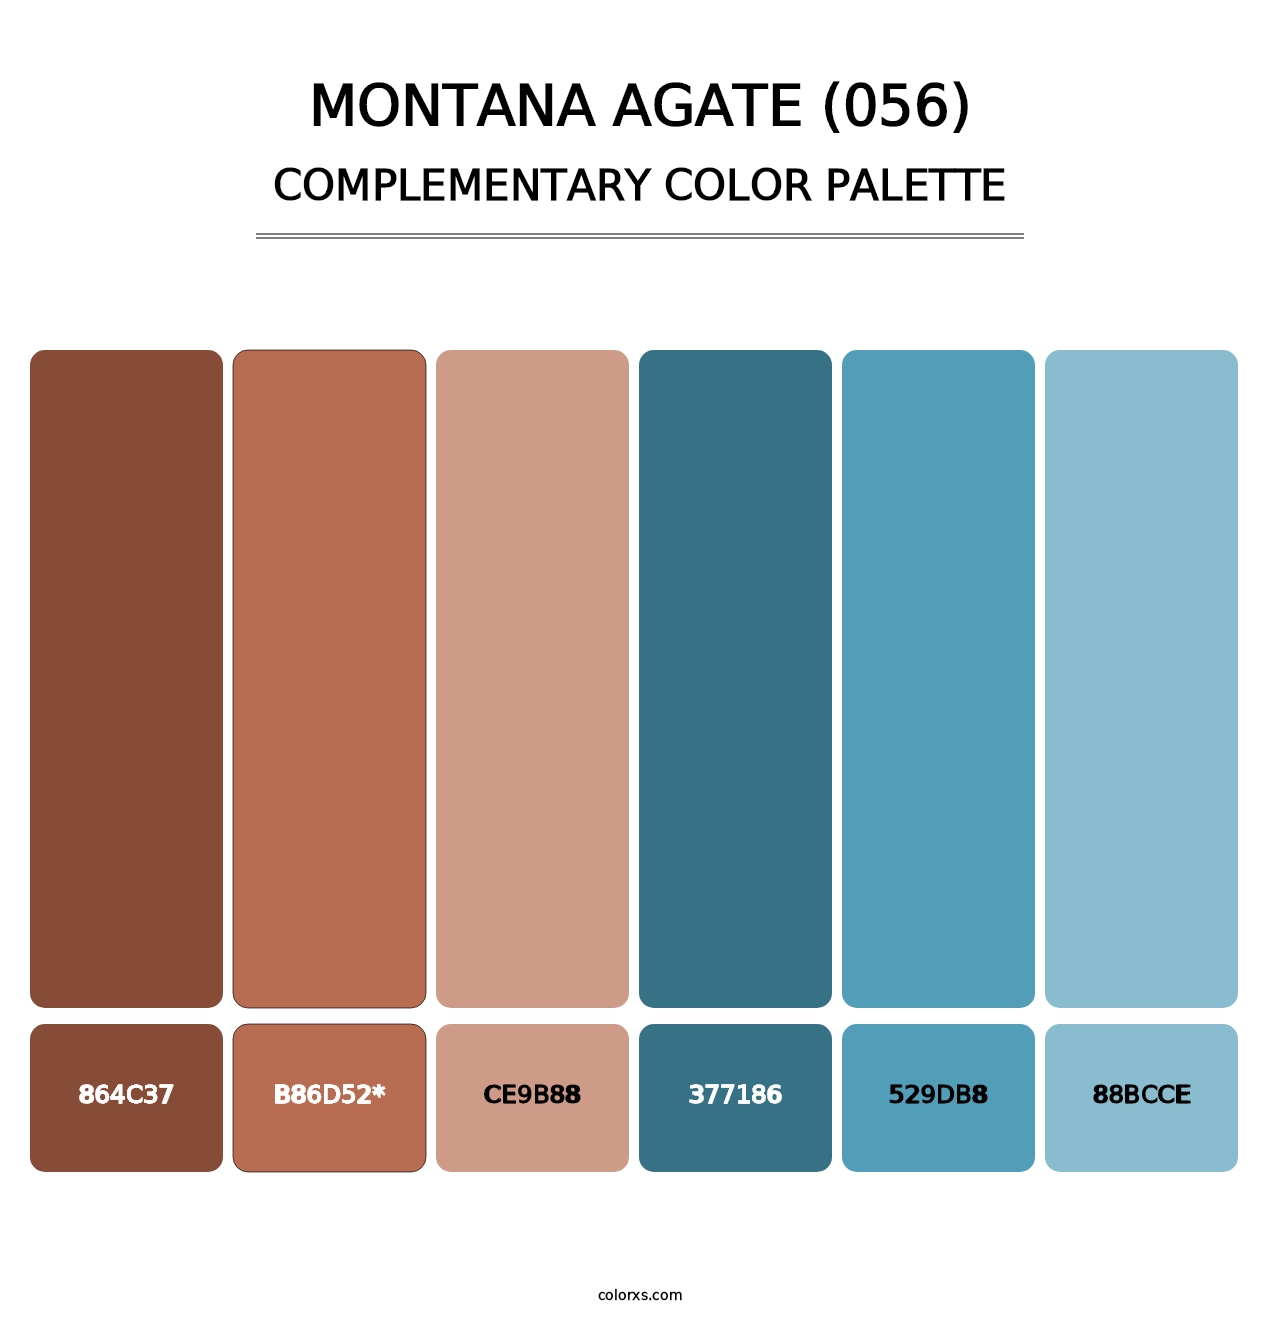 Montana Agate (056) - Complementary Color Palette